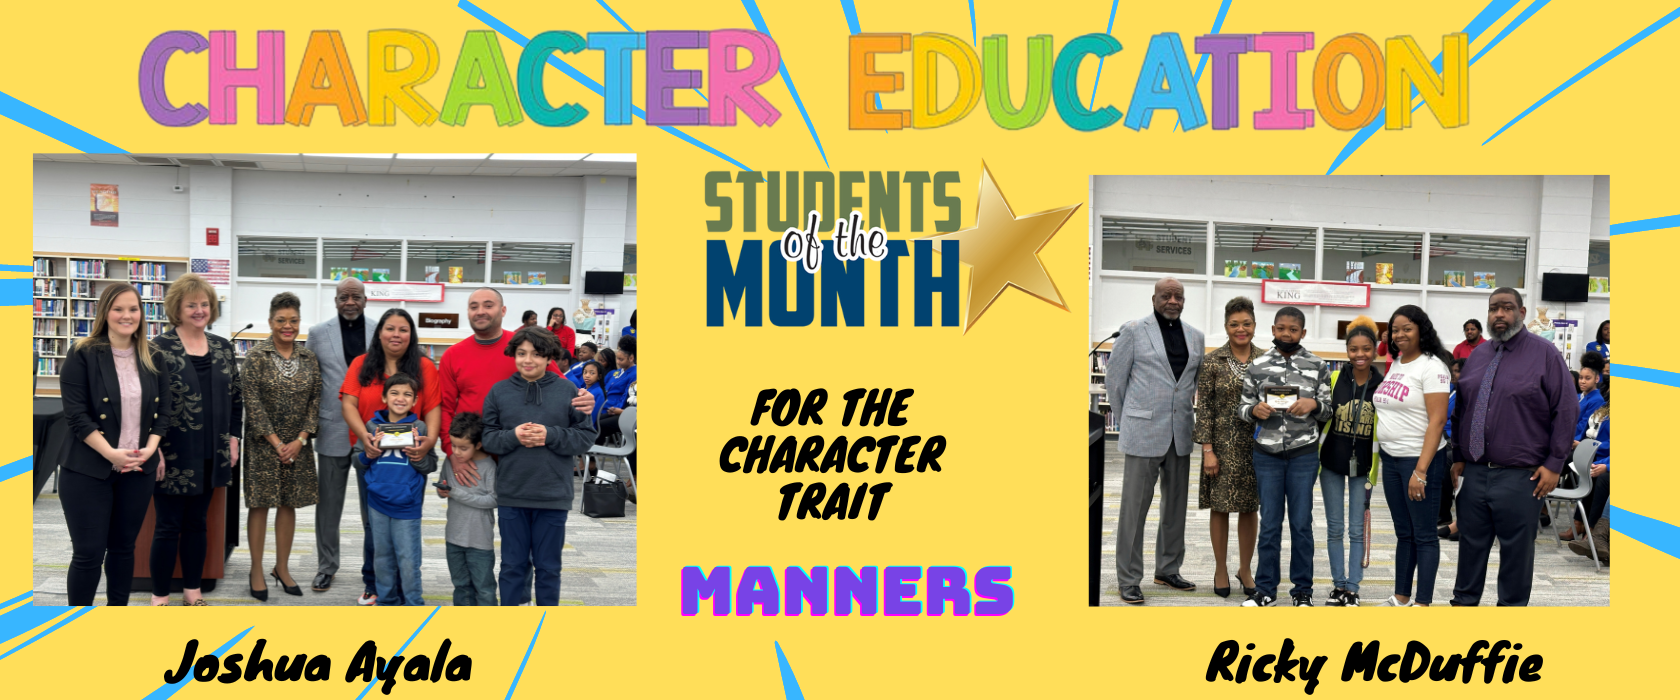 Character Education Student of the Month